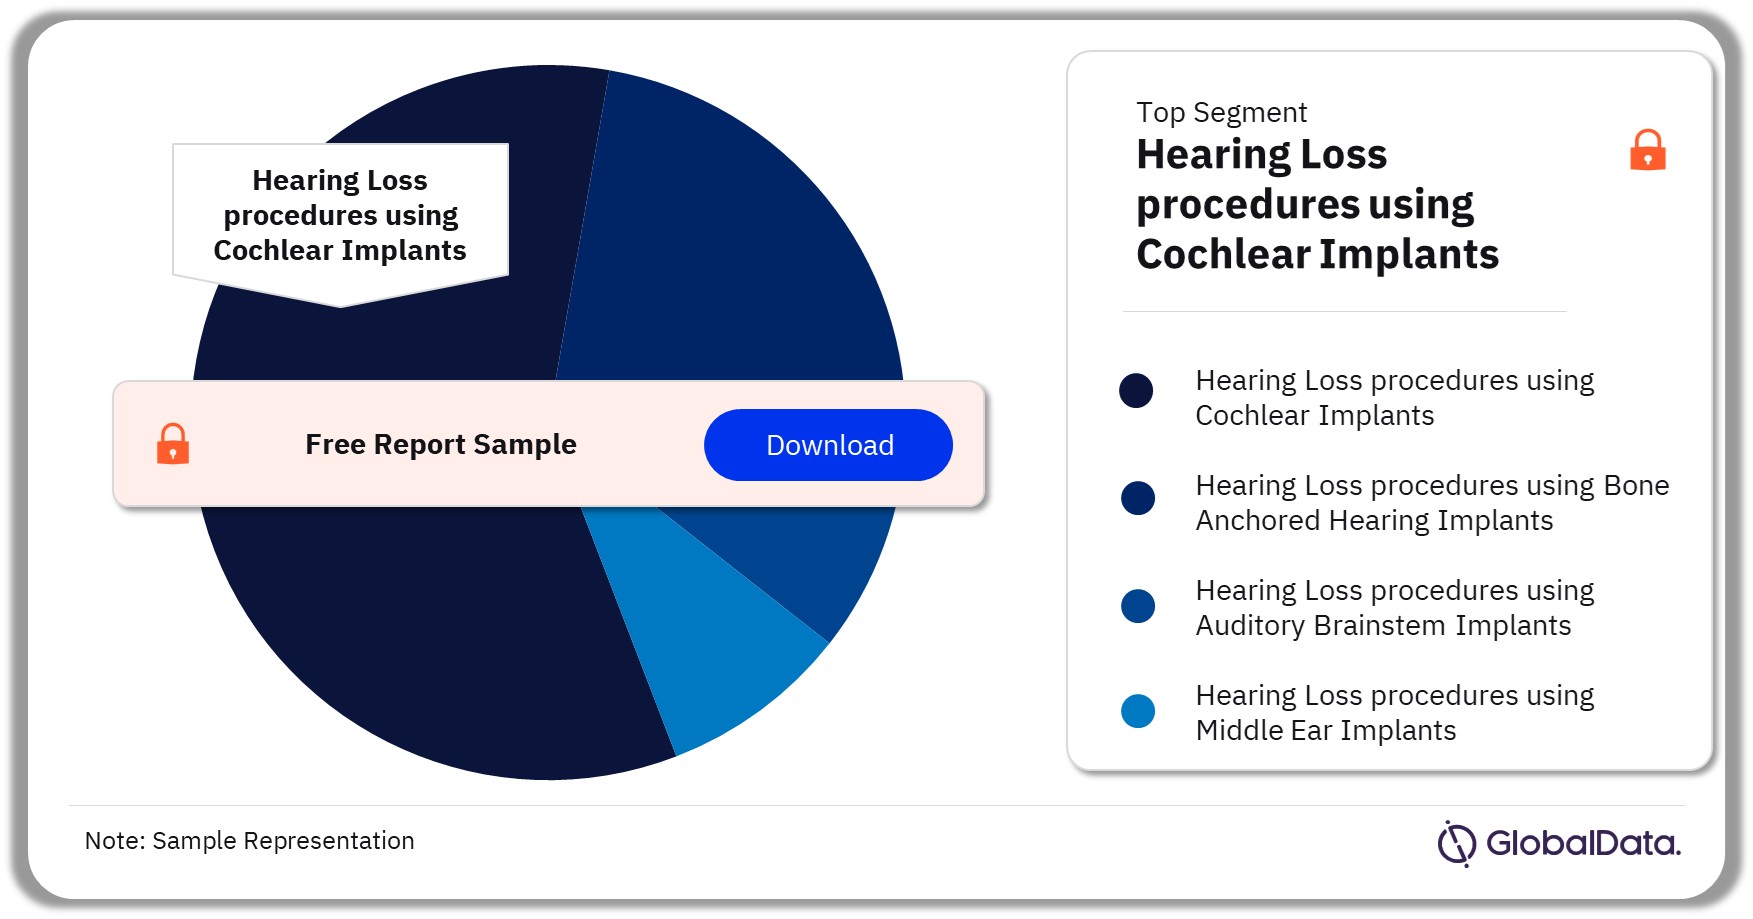 Italy Hearing Implant Procedures Market Analysis by Segments, 2022 (%)